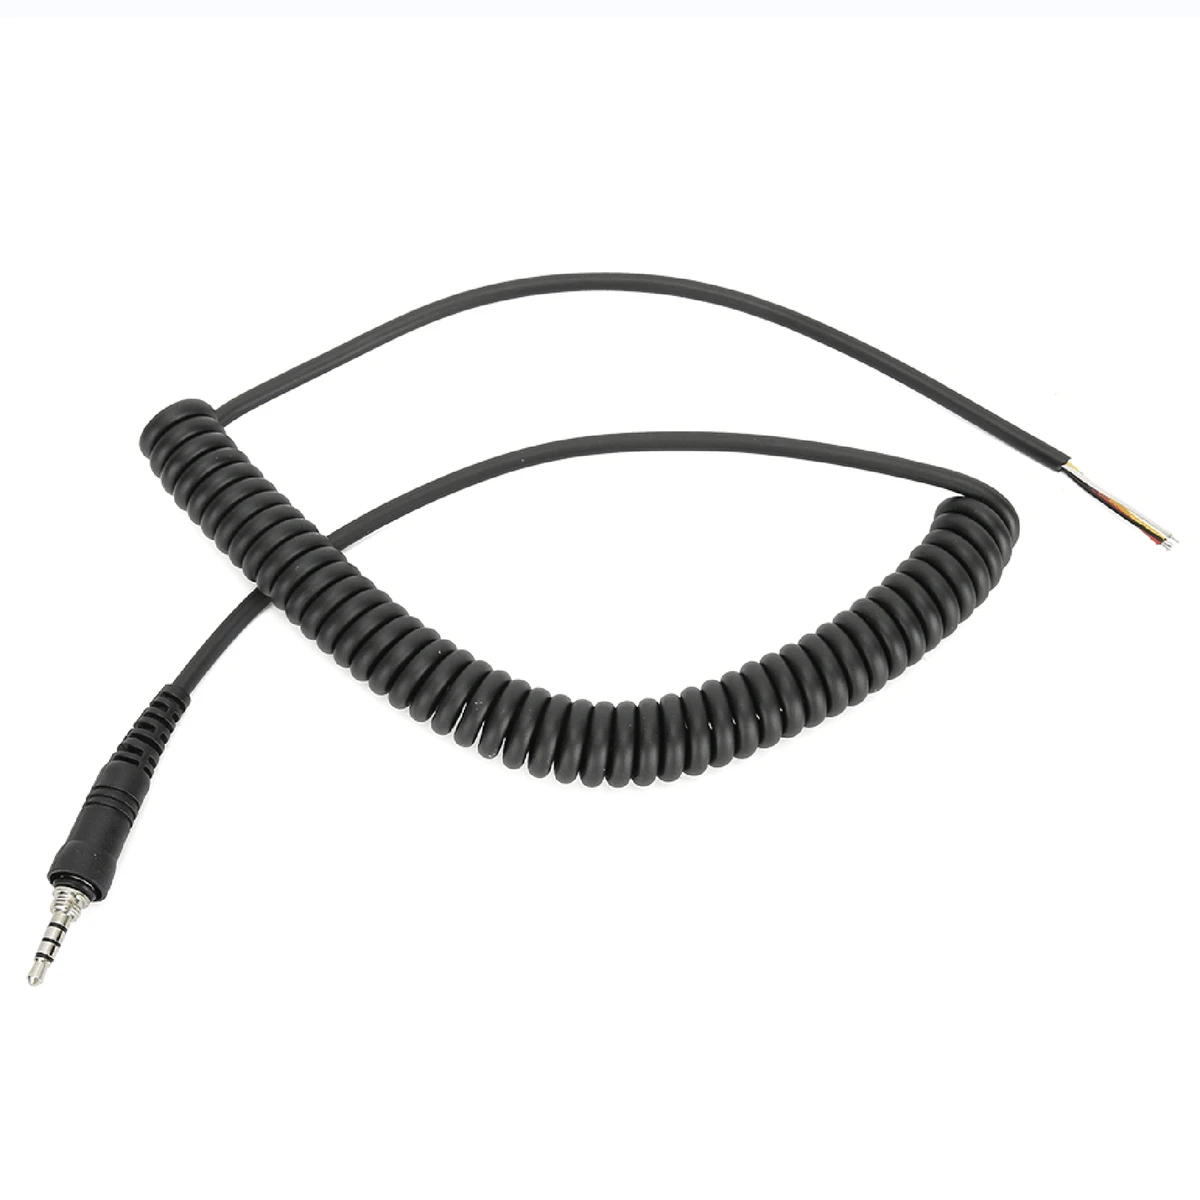 

Walkie Talkie Speaker Micorphone Cable for VX-6R VX-7R FT-270R FT-277R